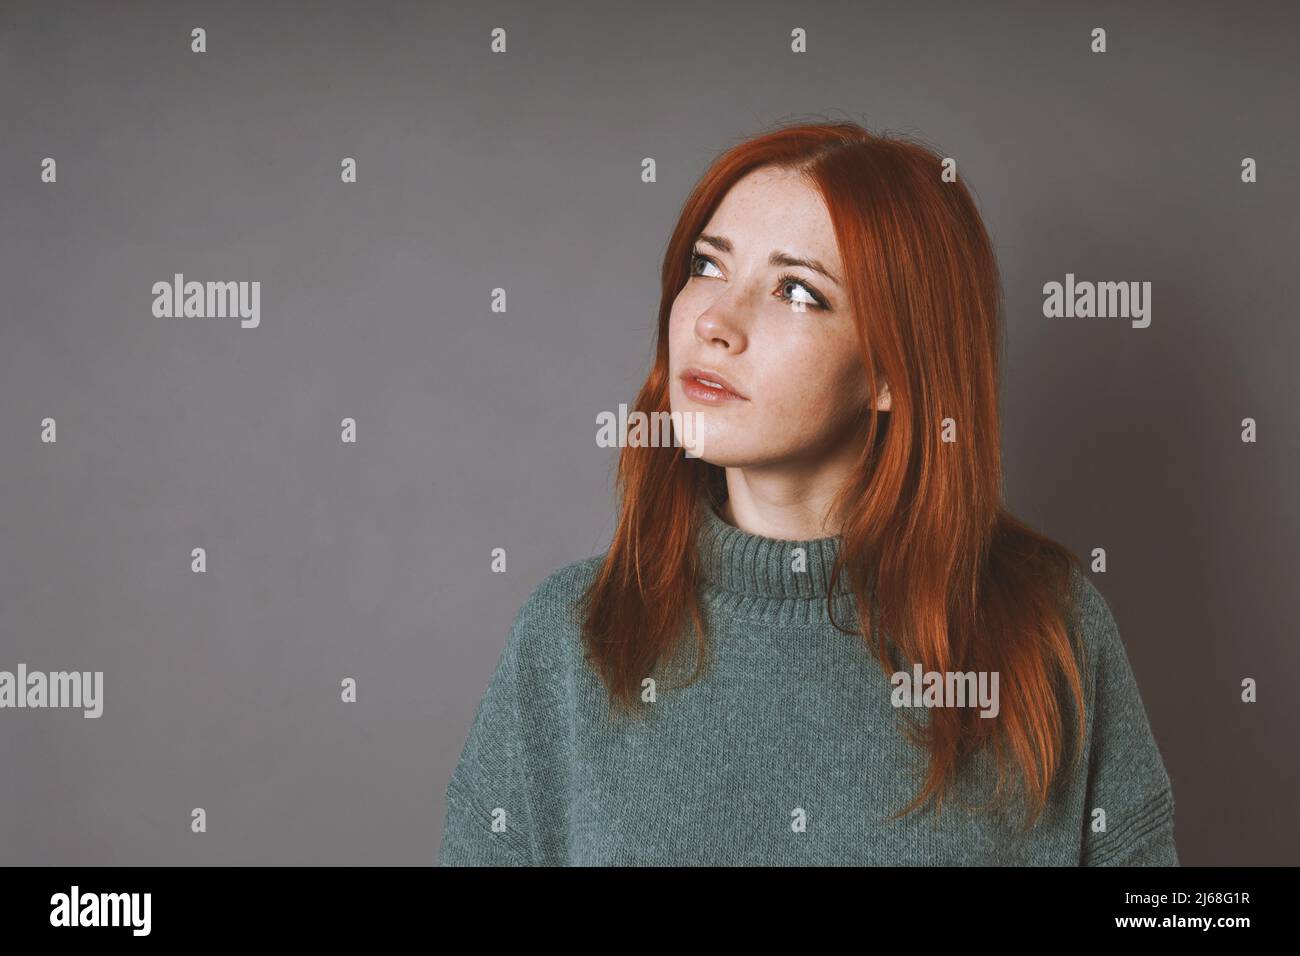 thoughtful woman in turleneck sweater is looking up thinking or planning Stock Photo